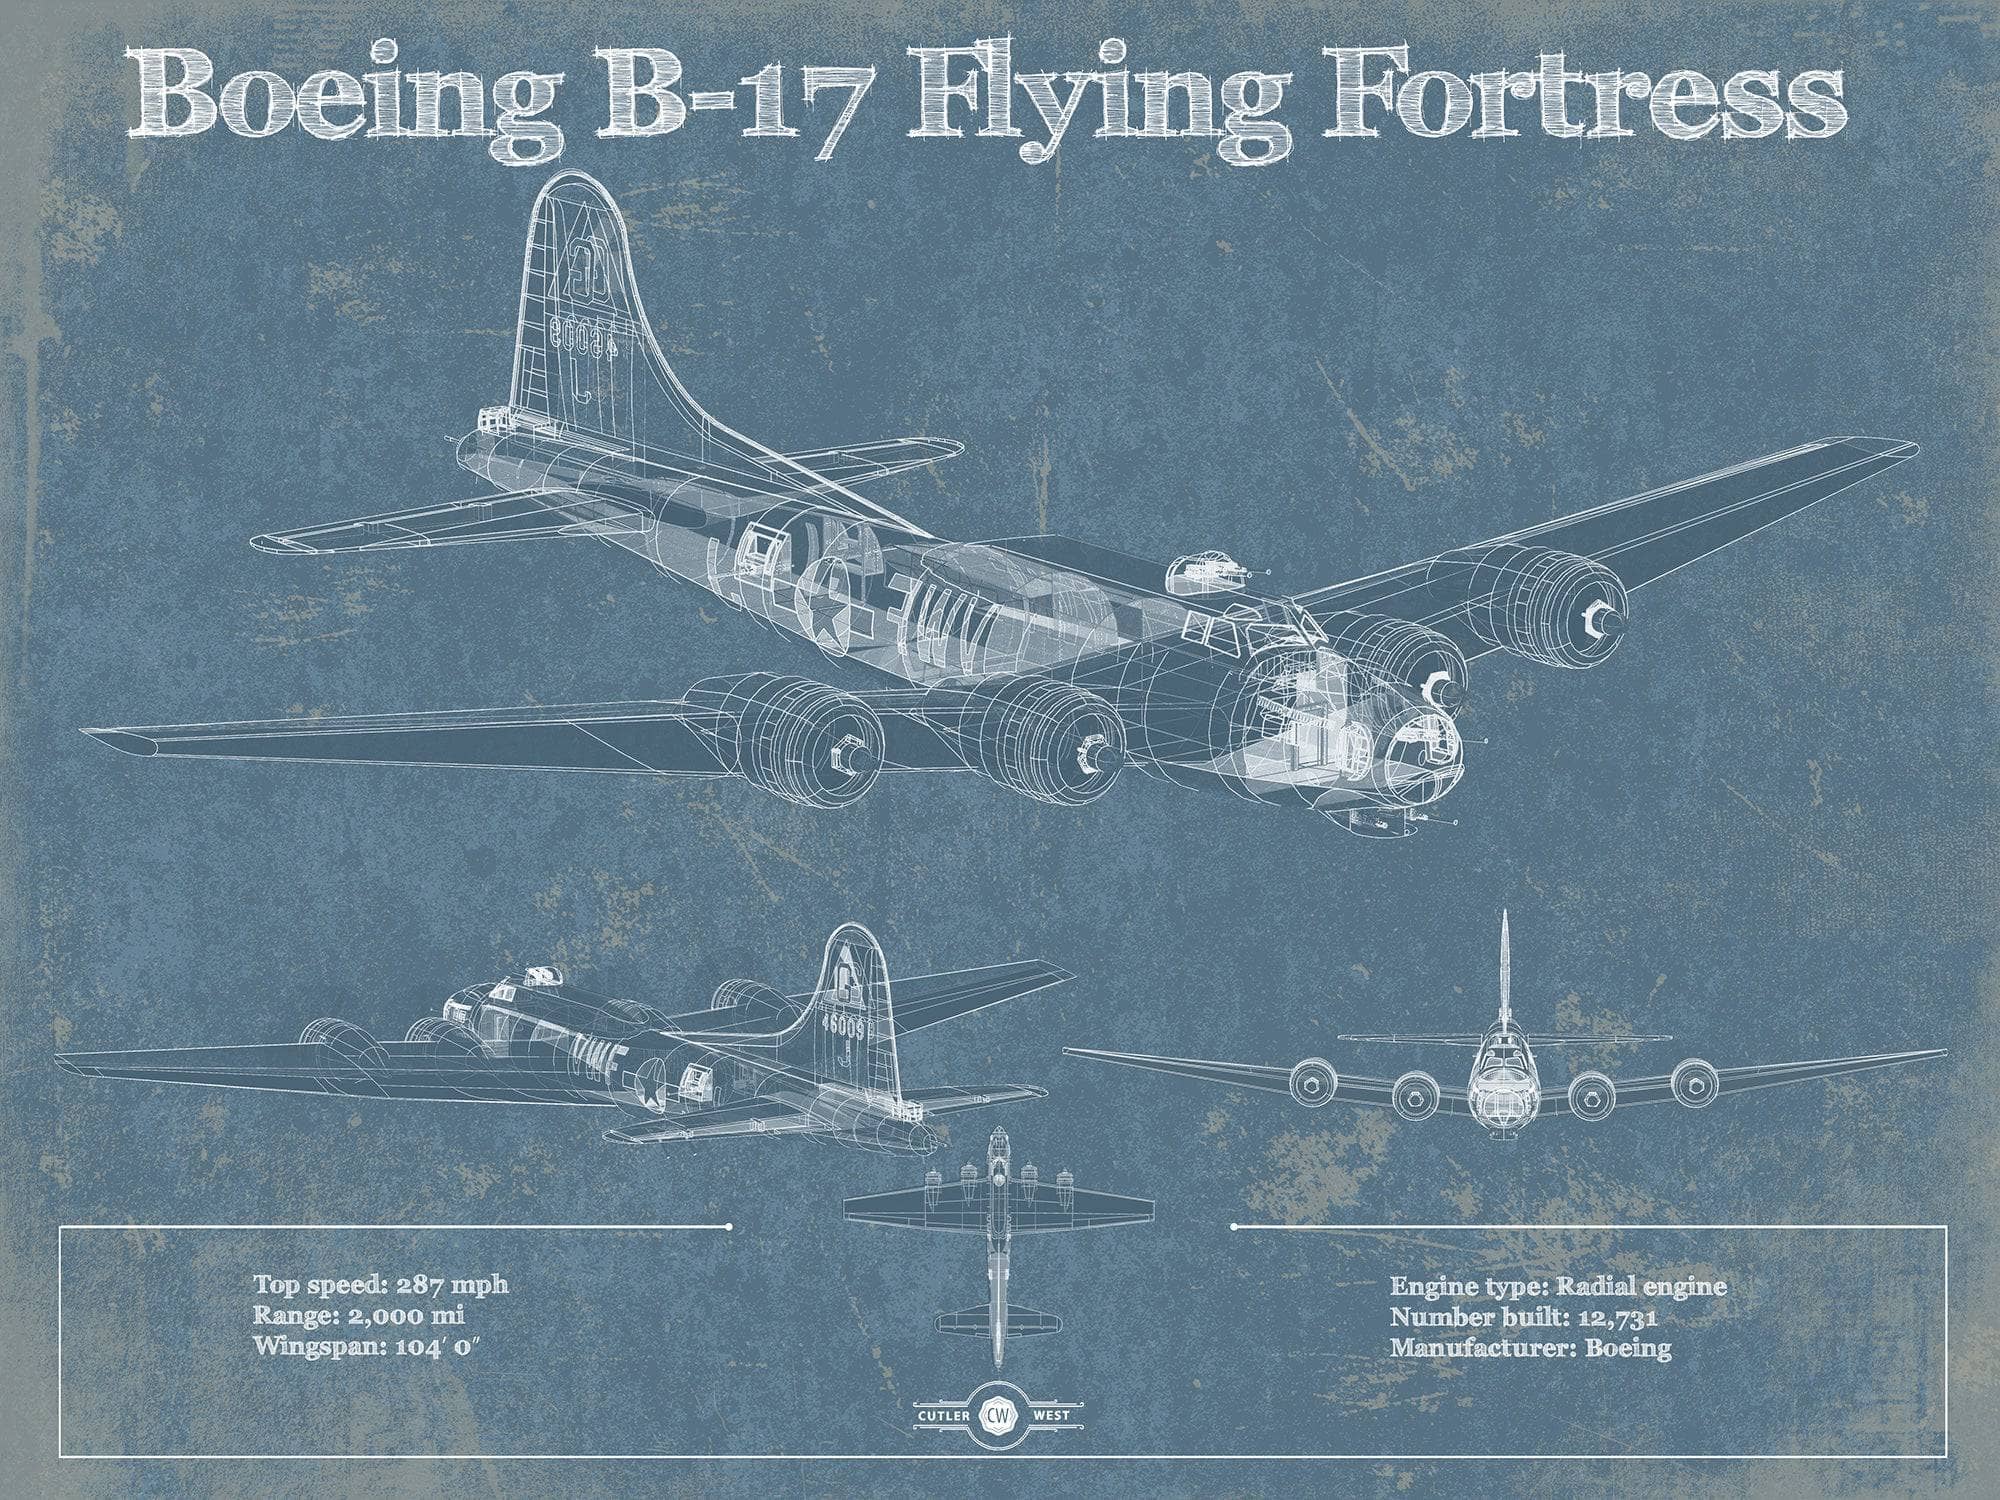 Cutler West Military Aircraft 14" x 11" / Unframed Boeing B-17 Flying Fortress  Vintage Aviation Blueprint - Custom Pilot Name Can Be Added 800570714_35471